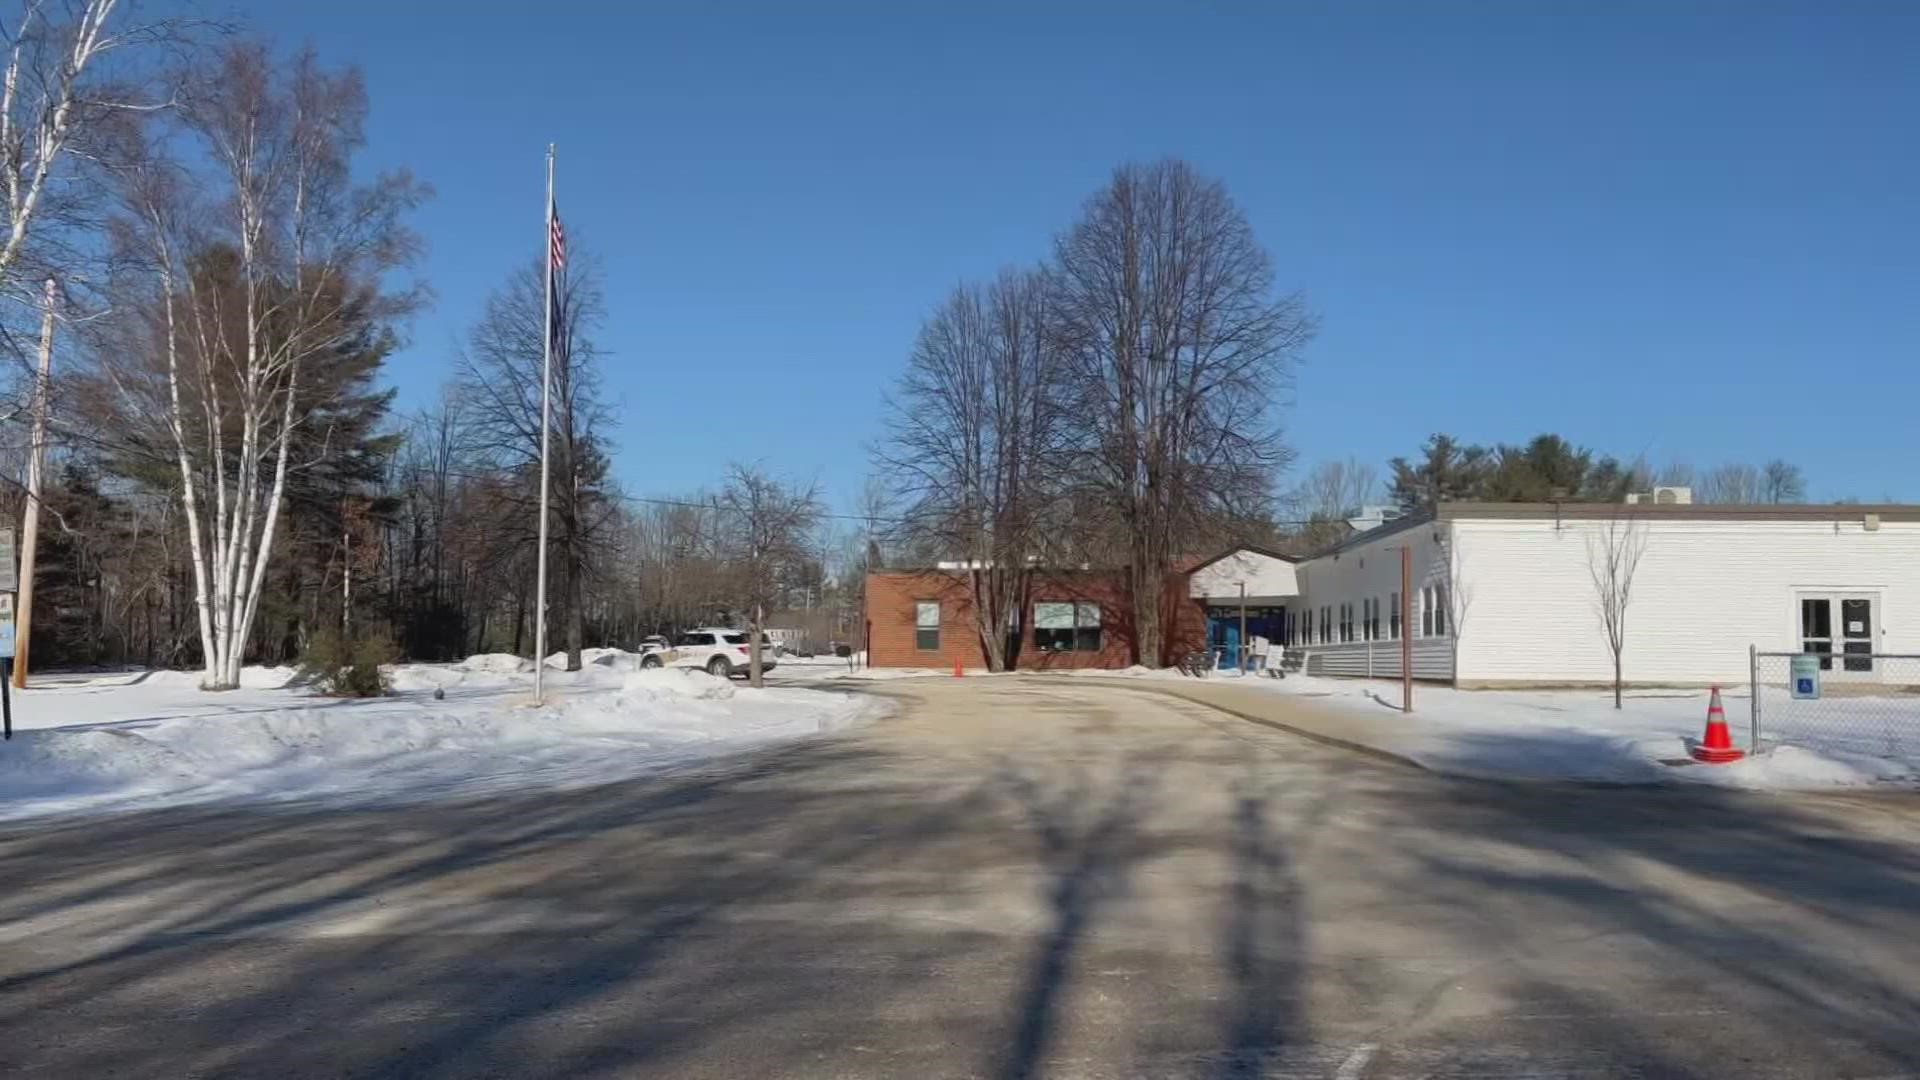 The elementary in Shapleigh is closed while police search for a wanted man.